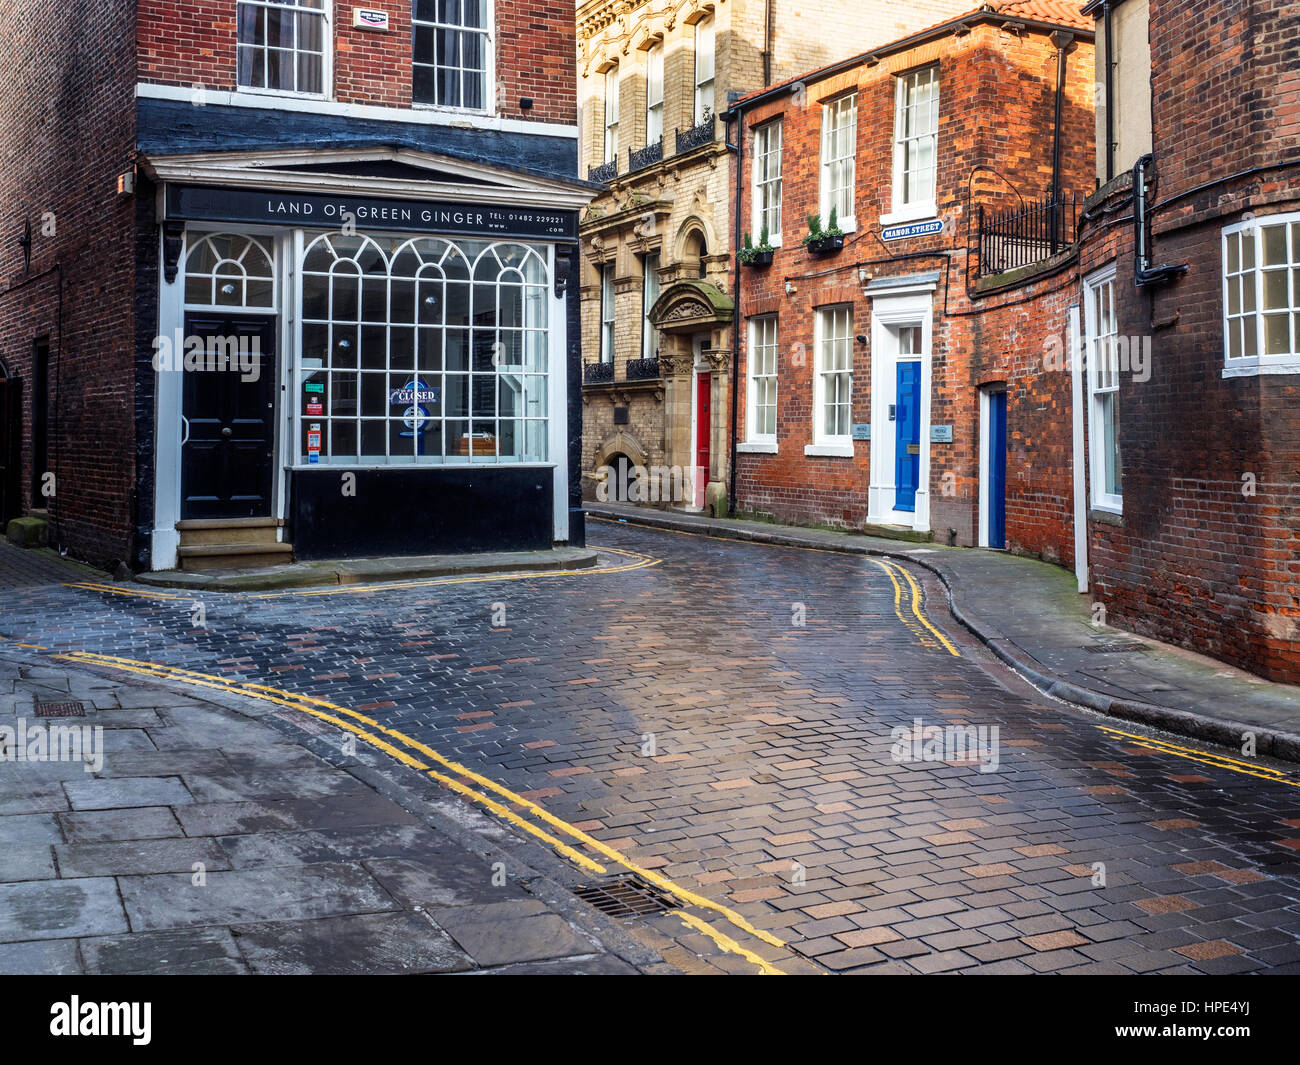 Shop at the Junction of Land of Green Ginger and Manor Street in Hull Yorkshire England Stock Photo